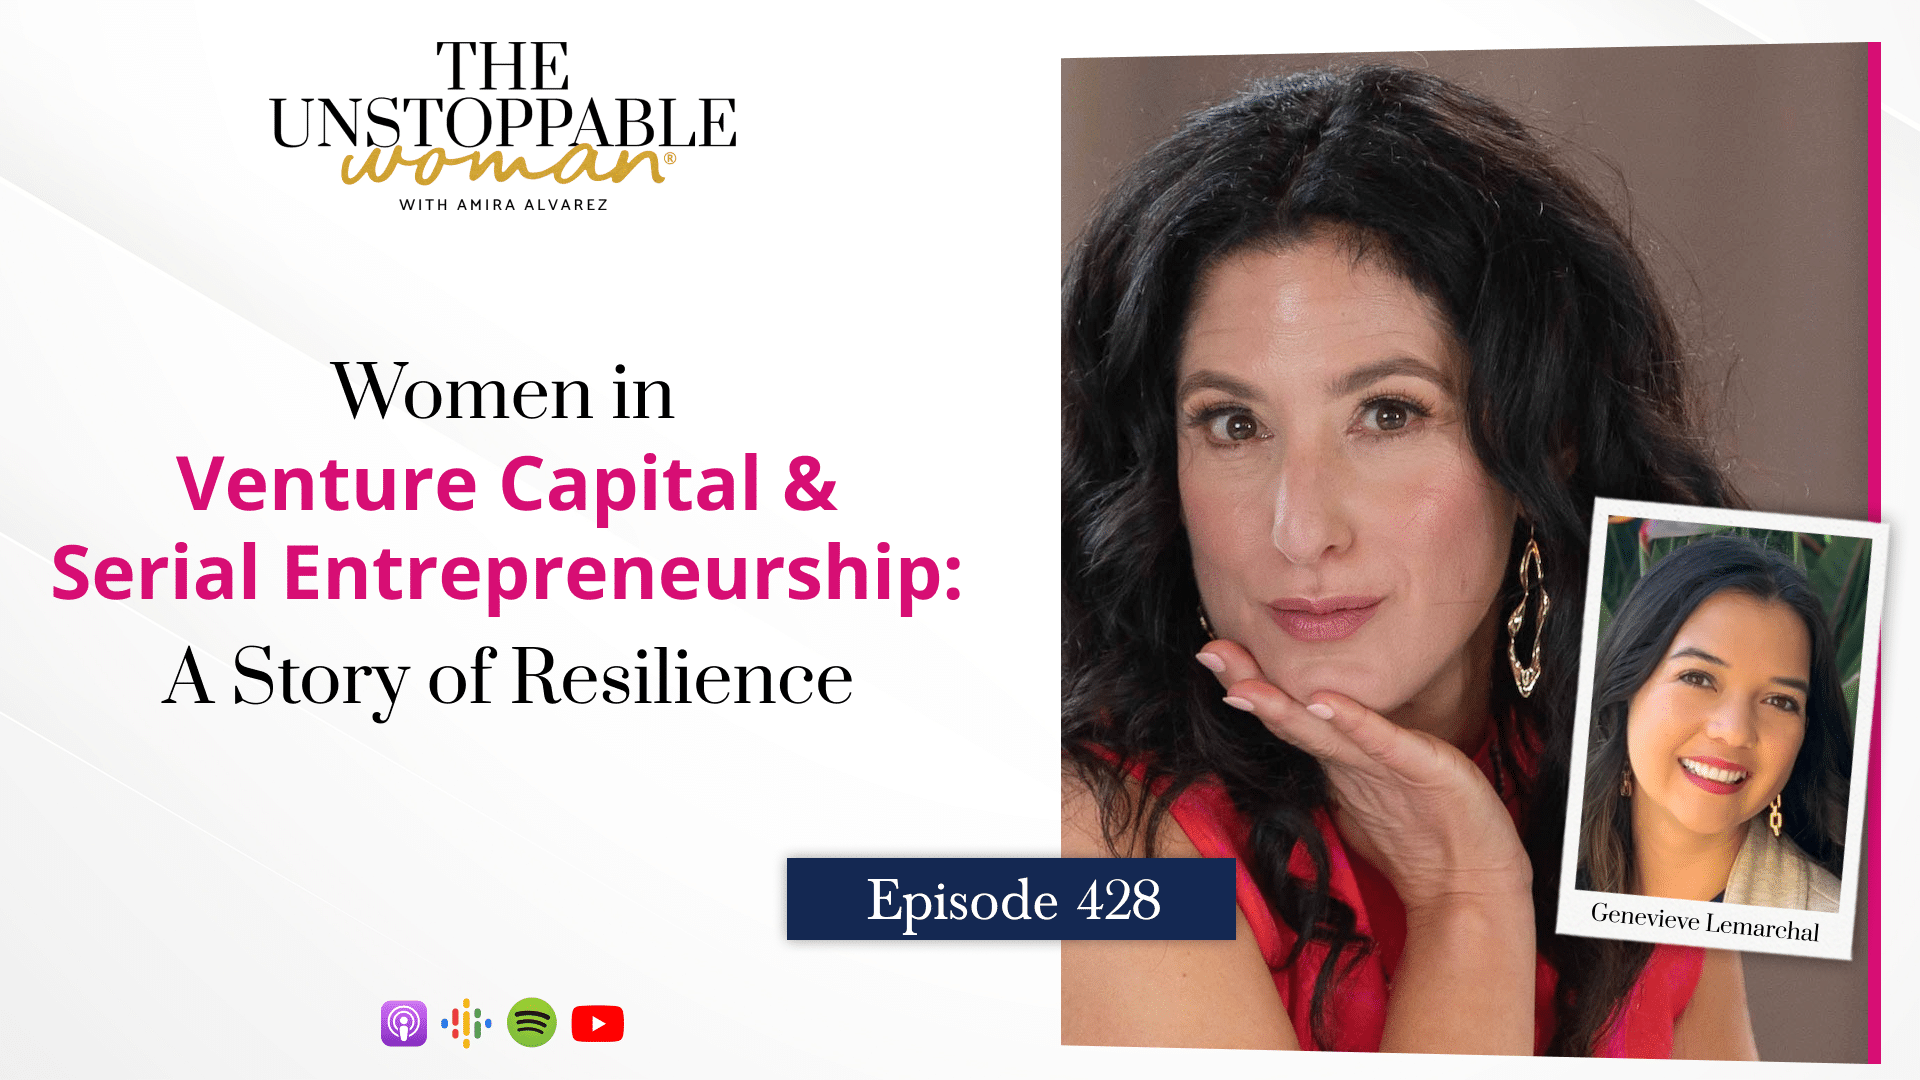 Women in Venture Capital & Serial Entrepreneurship: A Story of Resilience With Genevieve Lemarchal